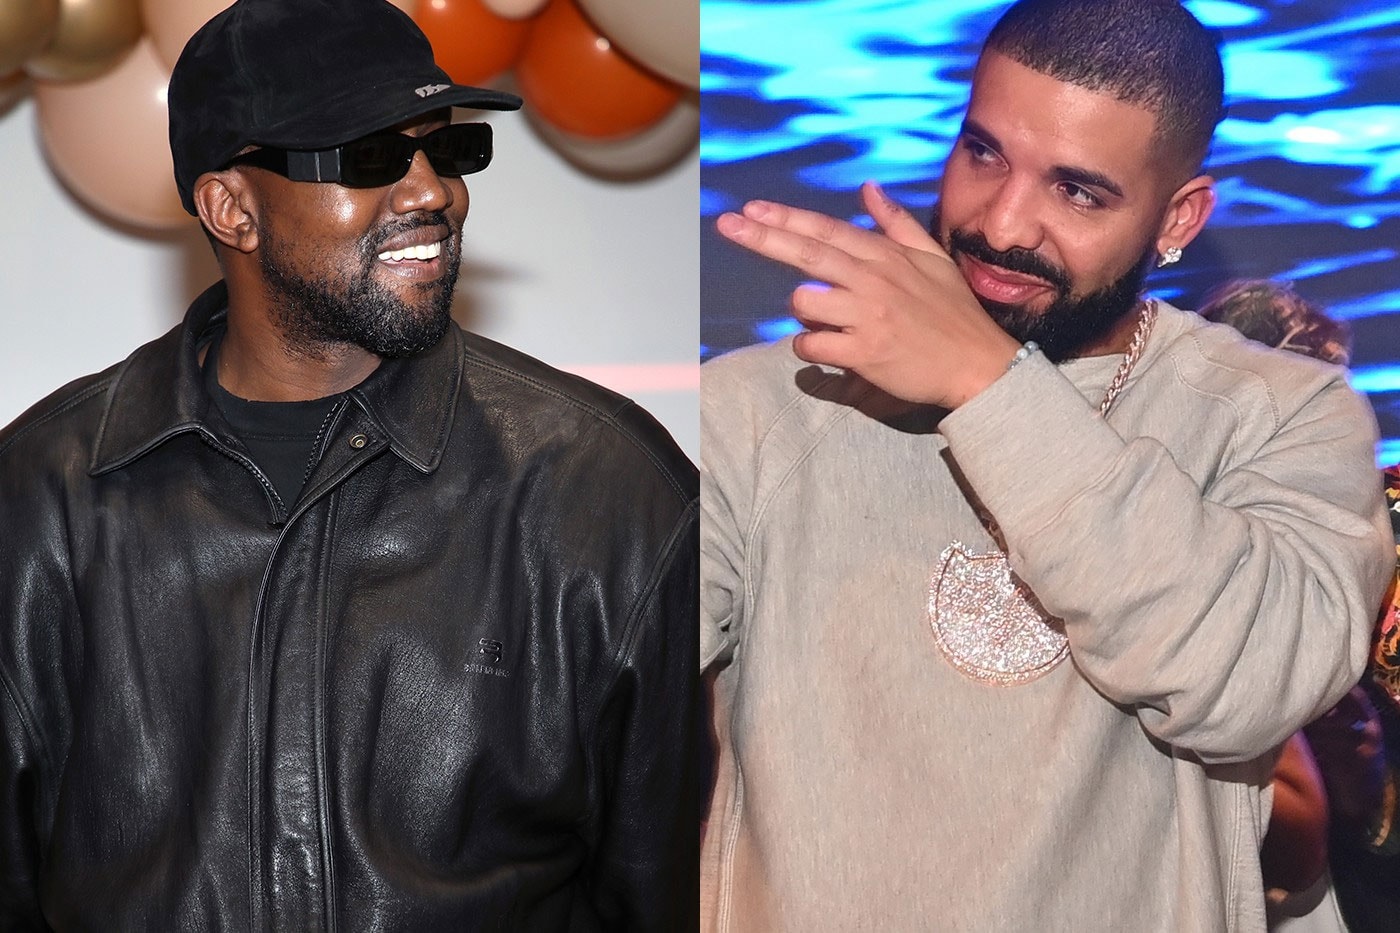 Drake and Kanye West Reunion Meant To Be "Blueprint" for Ending Feuds Between Rappers free larry hoover benefit concert larry hoover jr. 